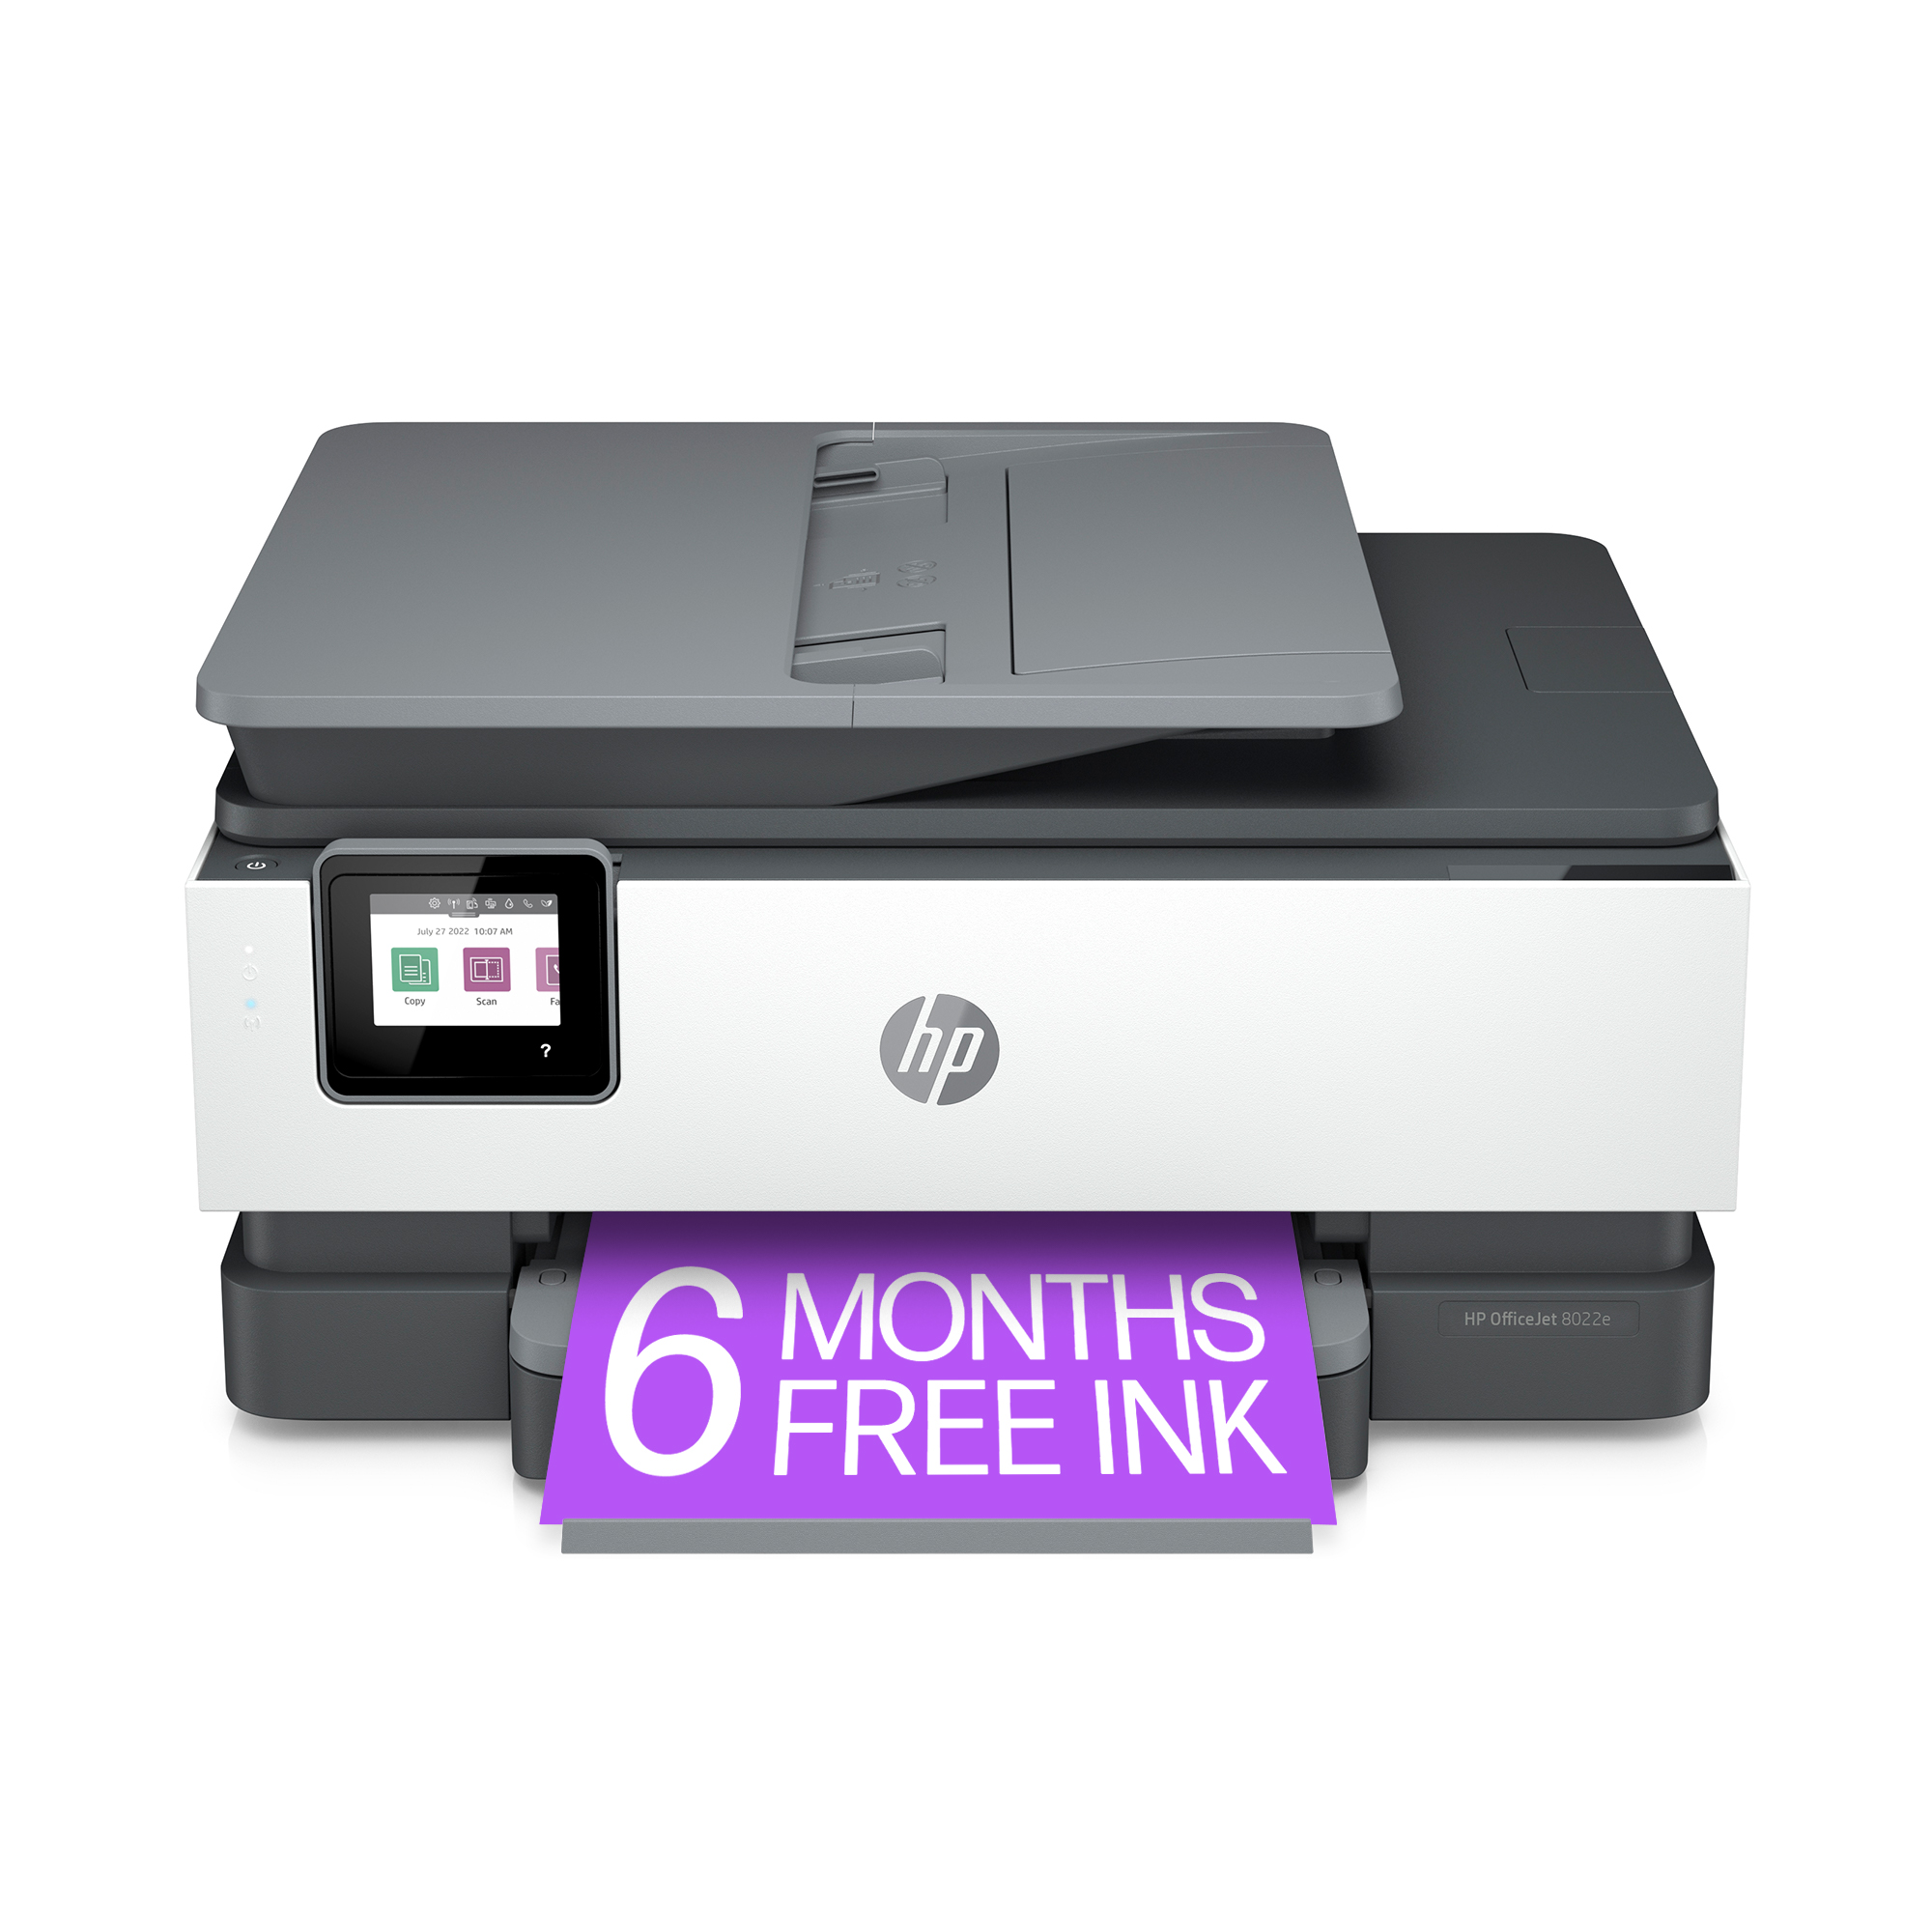 HP OfficeJet Pro 8022 All-in-One Printer for sale online